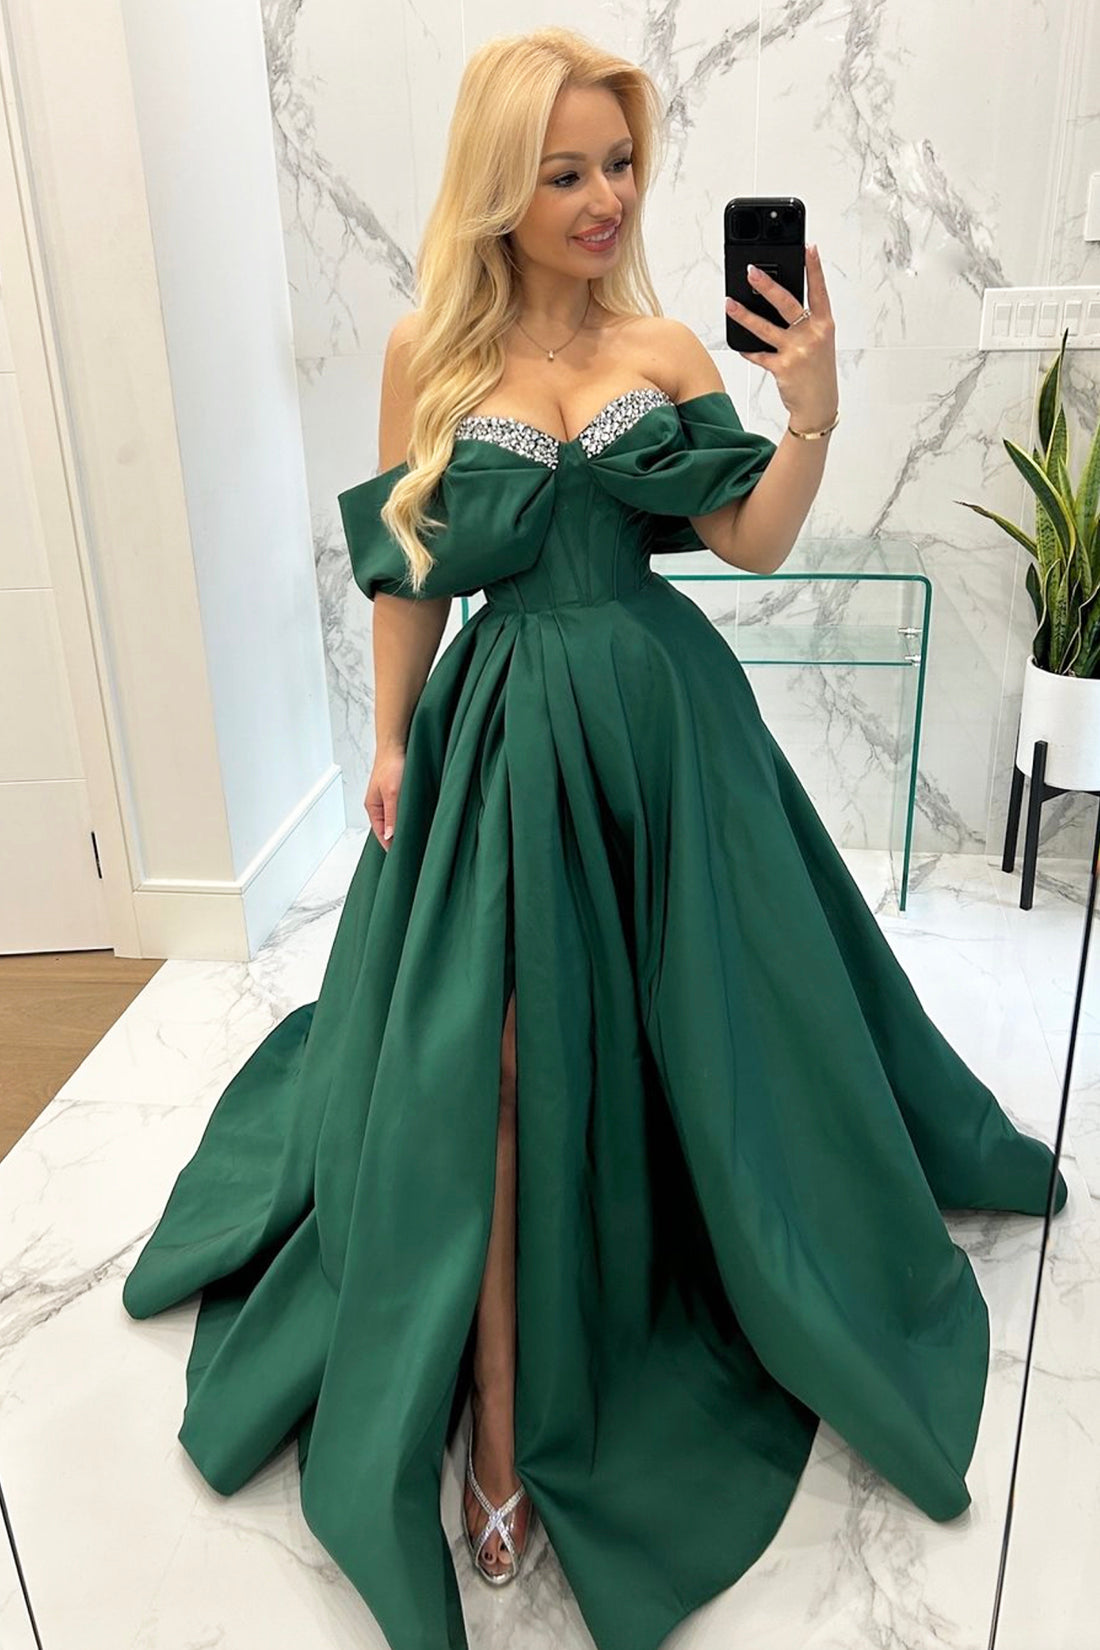 Green Satin Beaded Long Off the Shoulder Prom Dress, A-Line Evening Dress with Slit